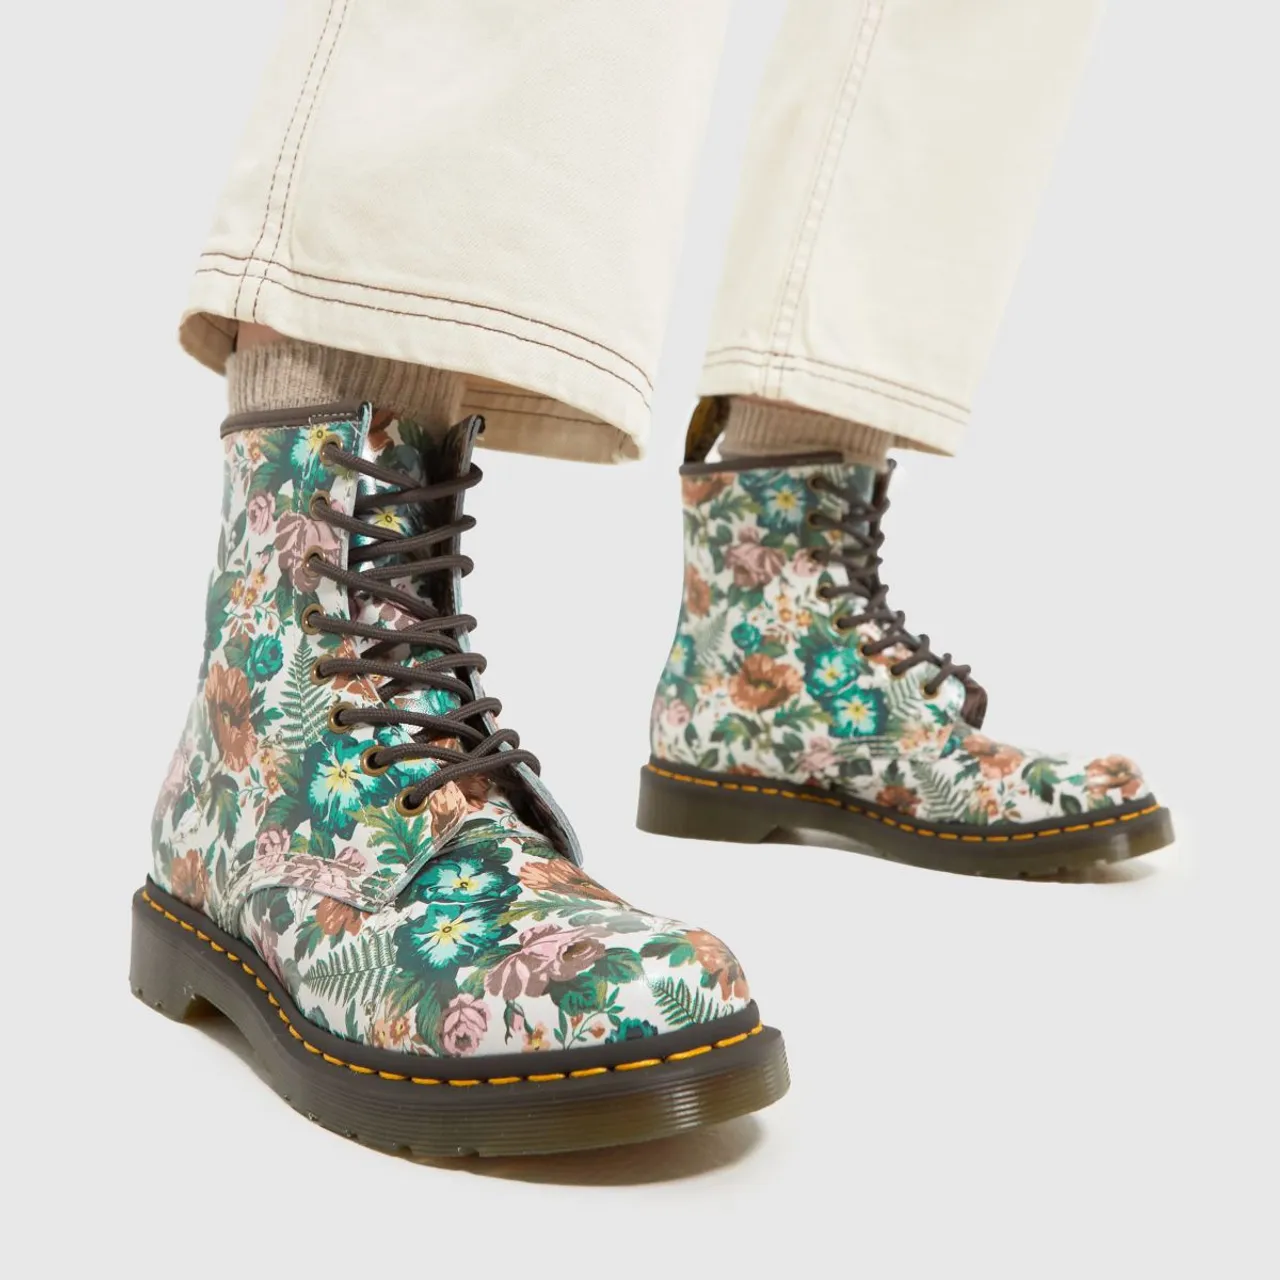 Dr Martens 1460 Boots in Multi